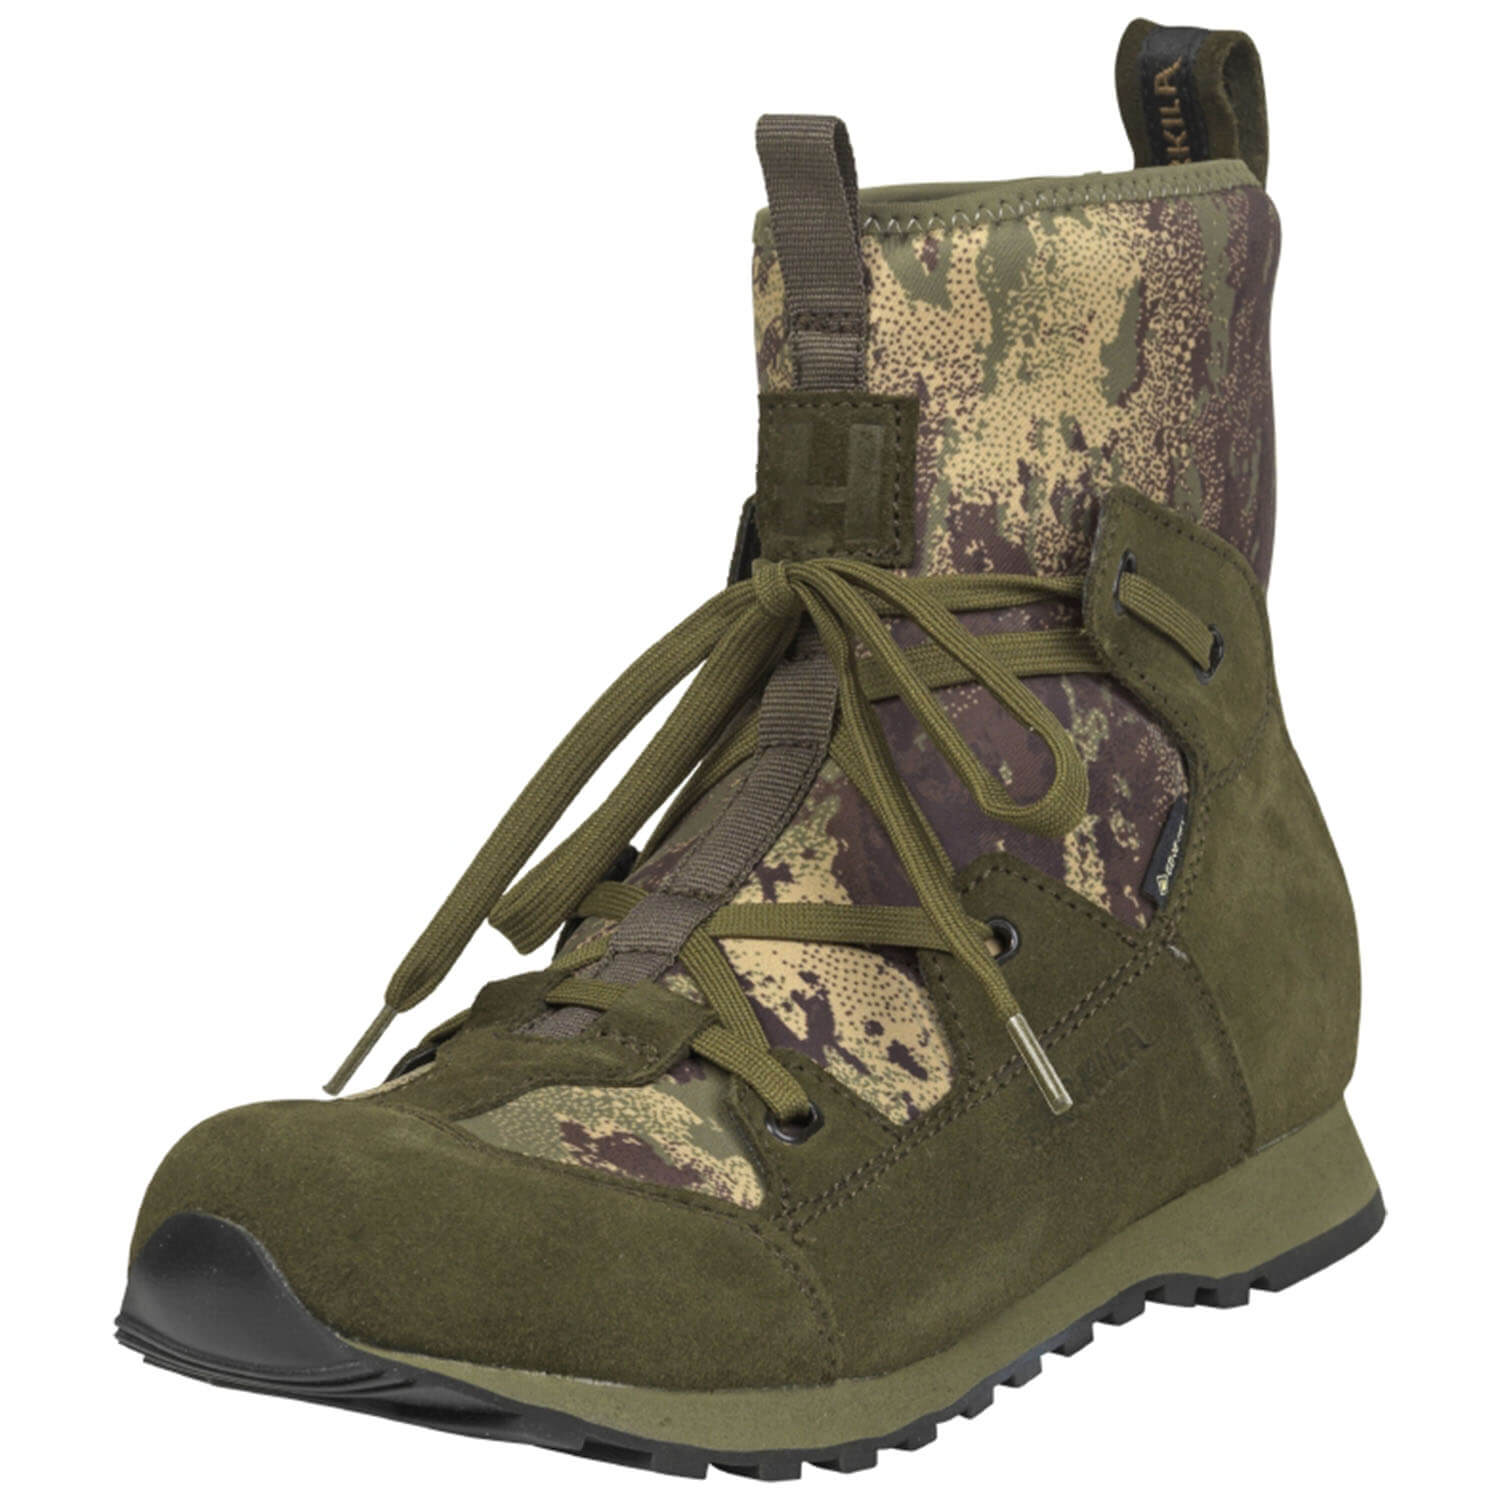 Härkila Stalking Boots Stalking GTX (Axis msp forest) - Shop by Activity